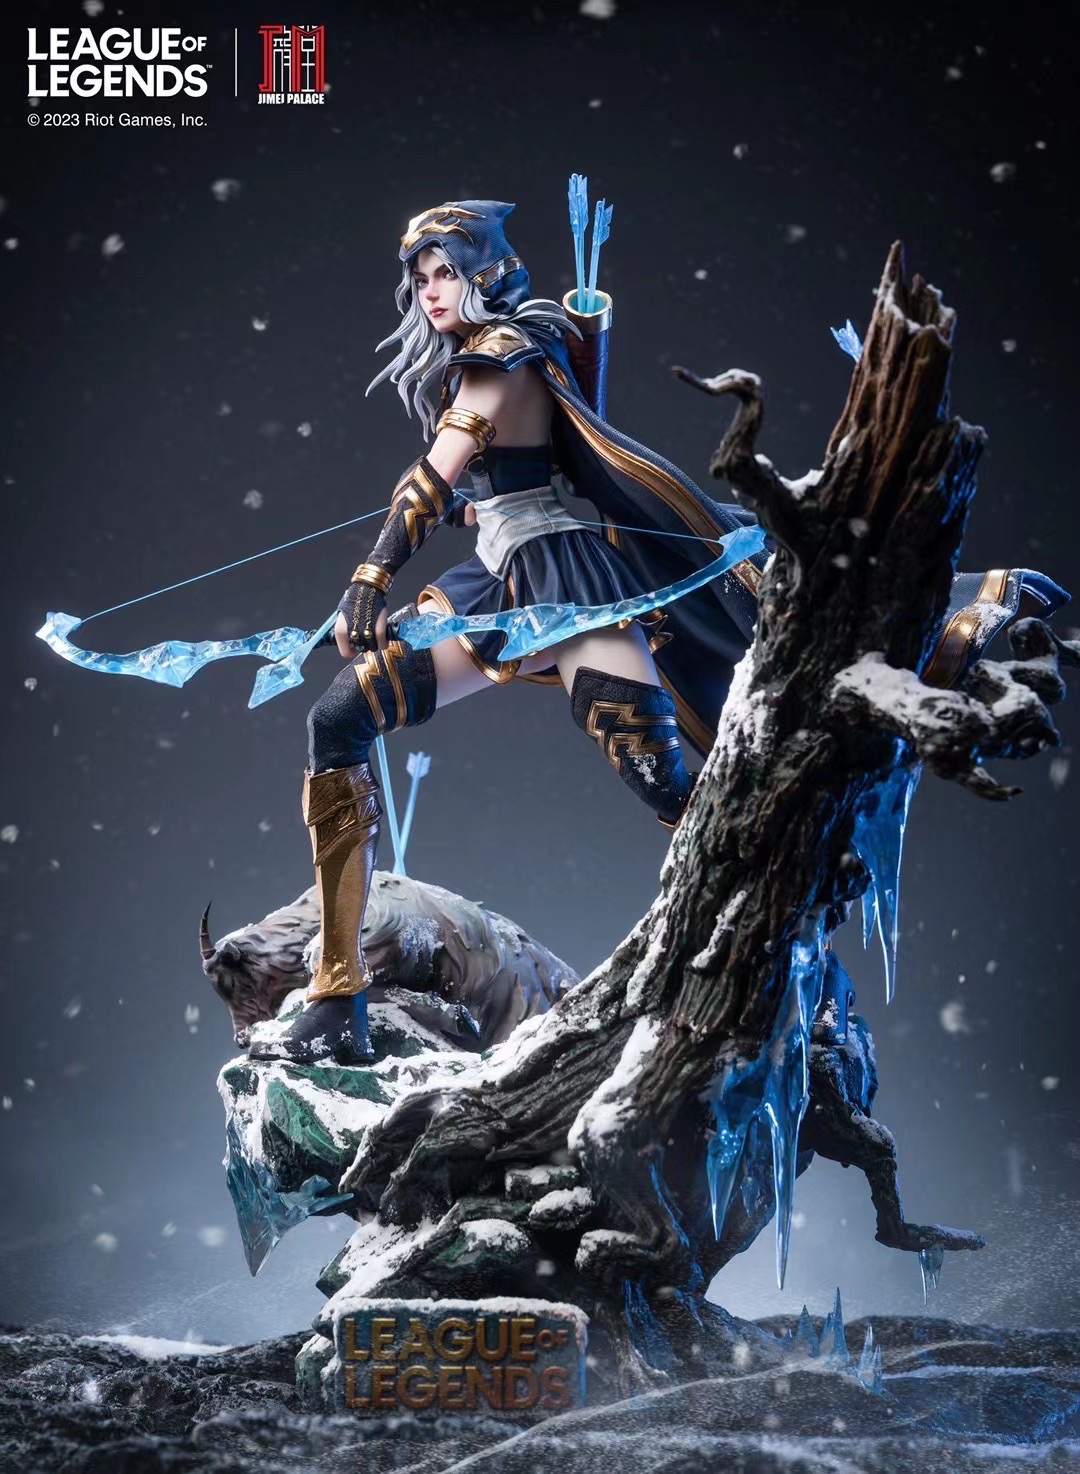 Ash “ The Frost Archer “ by Jimei Palace (มัดจำ) [[SOLD OUT]]